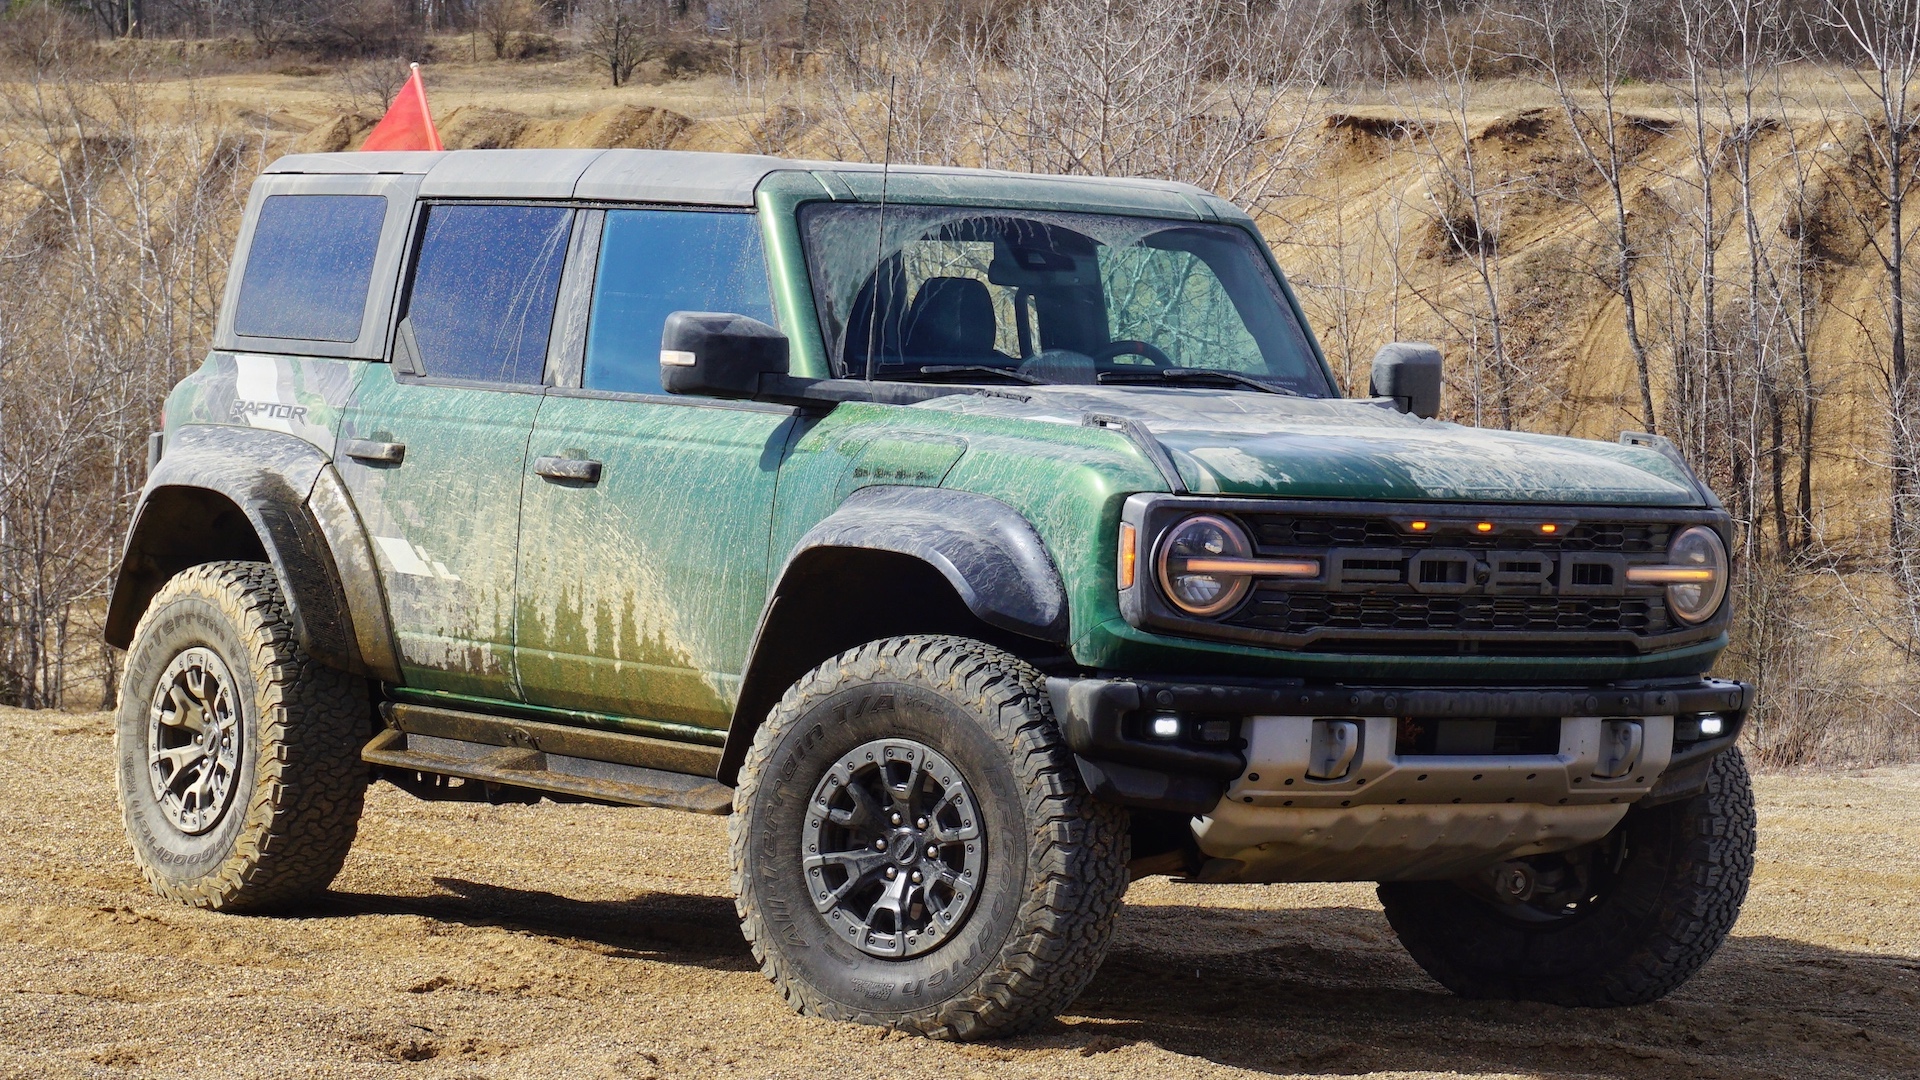 Maximize Your Off Road Performance with RIGID Off Road Lights